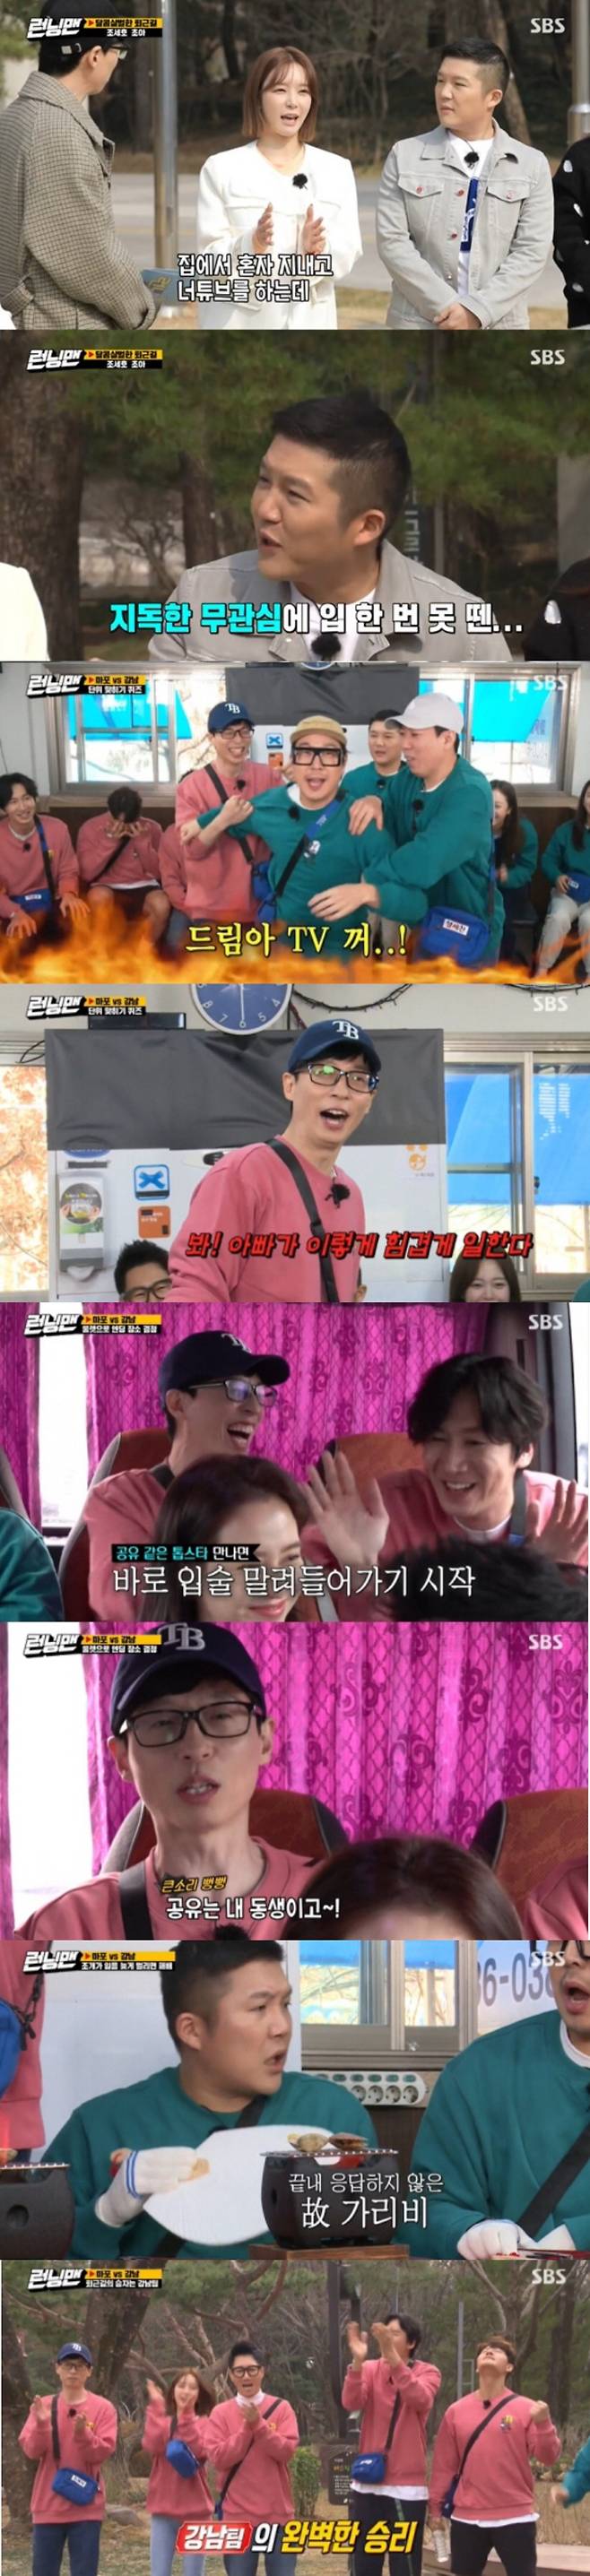 Jo Se-ho and Park Choa appeared as guests on SBS Running Man.In Running Man broadcast on the 11th, Race was decorated with Sweet and bloody work route race after finishing in the winning team area, and Jo Se-ho and Park Choa were invited as guests.Yoo Jae-Suk, Ji Seok-jin, Kim Jong-kook, Lee Kwang-soo, Park Choa were divided into Gangnam District Team, Haha, Song Ji-hyo, Jeon So-min, Yang Se-chan, and Jo Se-ho were divided into DJ Maphorisa Team, and Gangnam District Team Kim Jong-kook was divided into 1 in Premission He took the first mission place as a Banpo.The first mission was a quiz, and the Gangnam District team, which was filled with brains, cheered.Unexpectedly, the Kang team continued to struggle, and DJ Maphorisa team took the victory by hitting the quiz problem in succession.DJ Maphorisa team Choices Dongbinggo-dong as next mission sitePark Choa and Jo Se-ho laughed with a variety of recent talks.Park Choa, who has been with Running Man in six years, said, I am accustomed to watching TV for three years because I lie down.Jo Se-ho has Disclosure the privacy of Lee Kwang-soo and Yoo Jae-Suk with Healthfield Talk.Jo Se-ho described Lee Kwang-soos distorted expression, saying, Lee Kwang-soo does a health with the weight that should not be done. Lee Kwang-soo said, Yoo Jae-Suk points out when he meets Jo Se-ho at the gym, He laughed.On the other hand, the Gangnam District team won all the missions in Dongbinggo-dong and Gangnam District, preempting the favorable highlands, and winning the final mission in Yeoksam-dong with Park Choas performance.Eventually, the final ending area was also Choicesed to Gangnam District, which secured a lot of roulette compartments, and Gangnam District Ending was held.On the other hand, the average audience rating of 2049 on the day was 2.5% (Nilson Korea, based on the metropolitan area), and the Gangnam District team took the famous rice cake set of Gangnam District, and DJ Maphorisa team took the best one minute with 6.5% of the highest audience rating per minute.